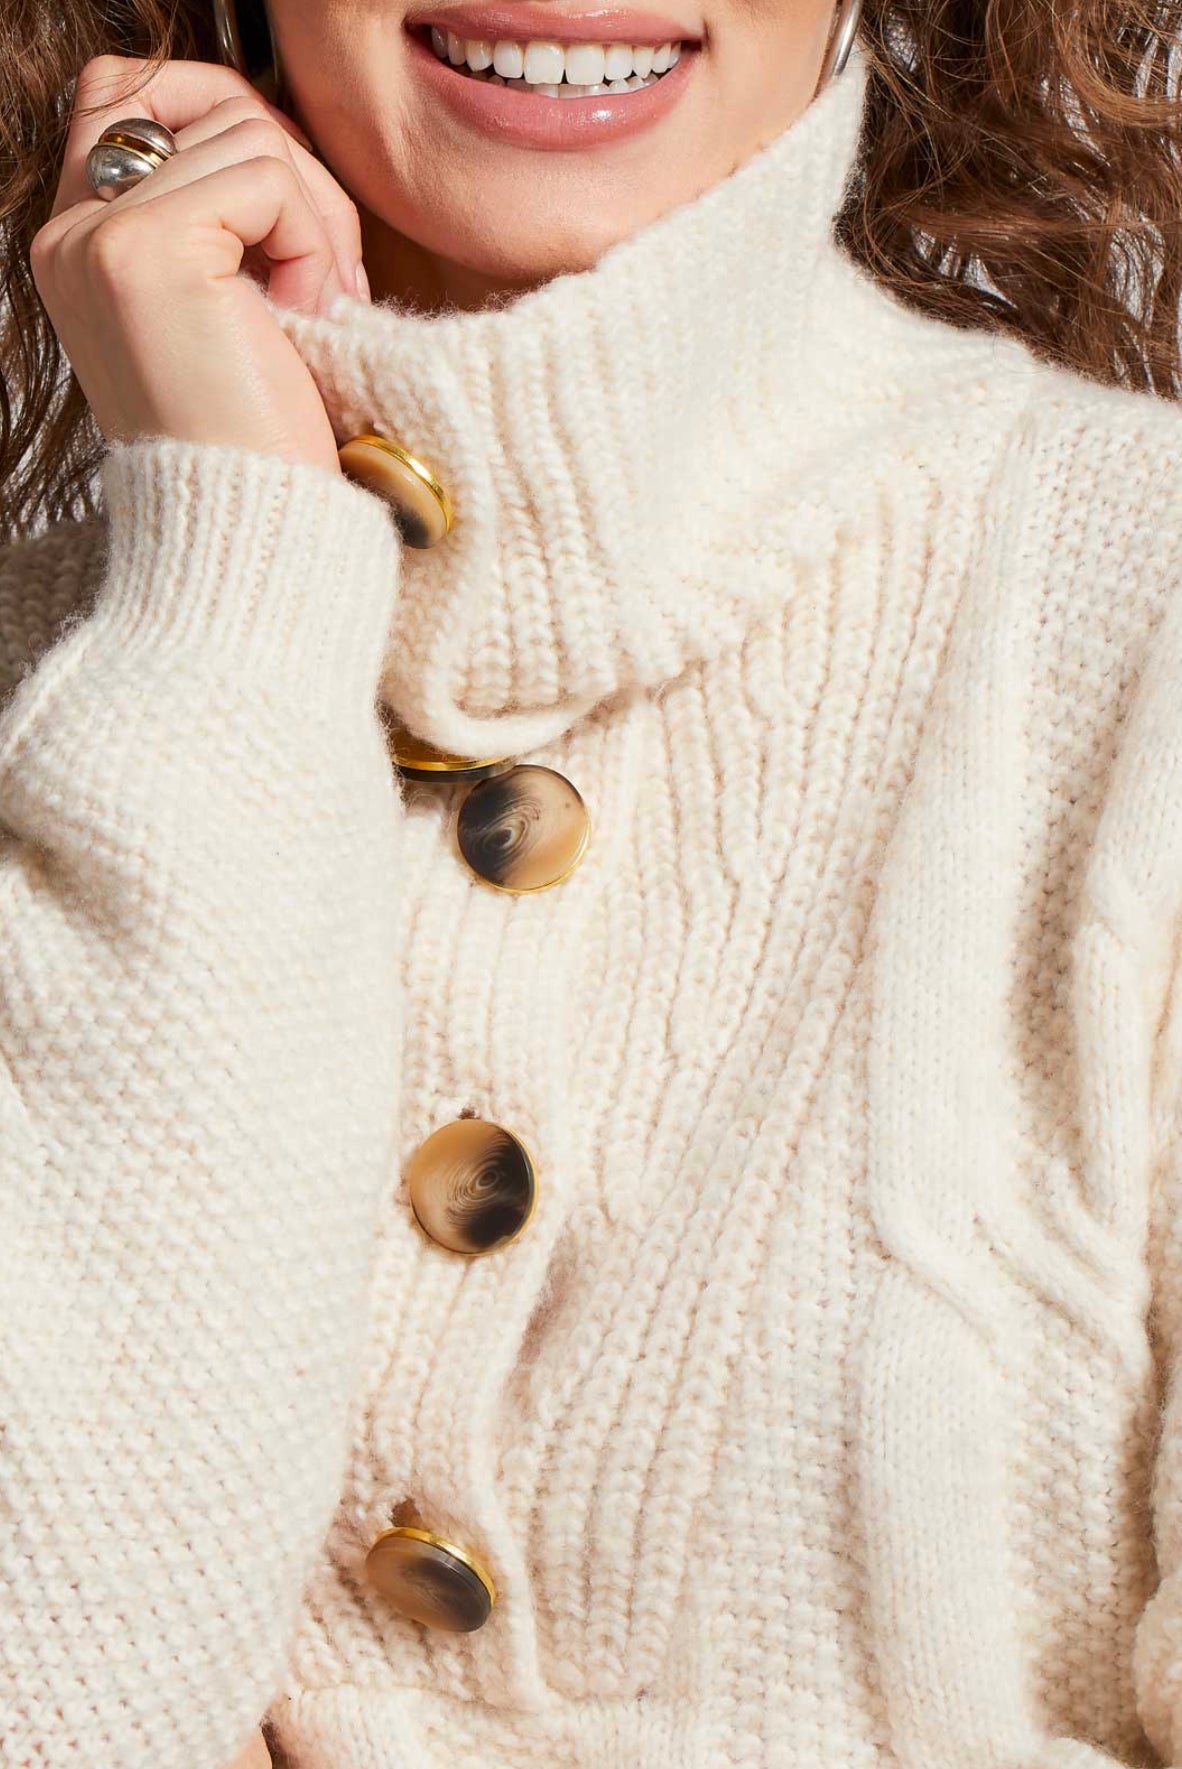 High Collar Sweater with Fancy Buttons